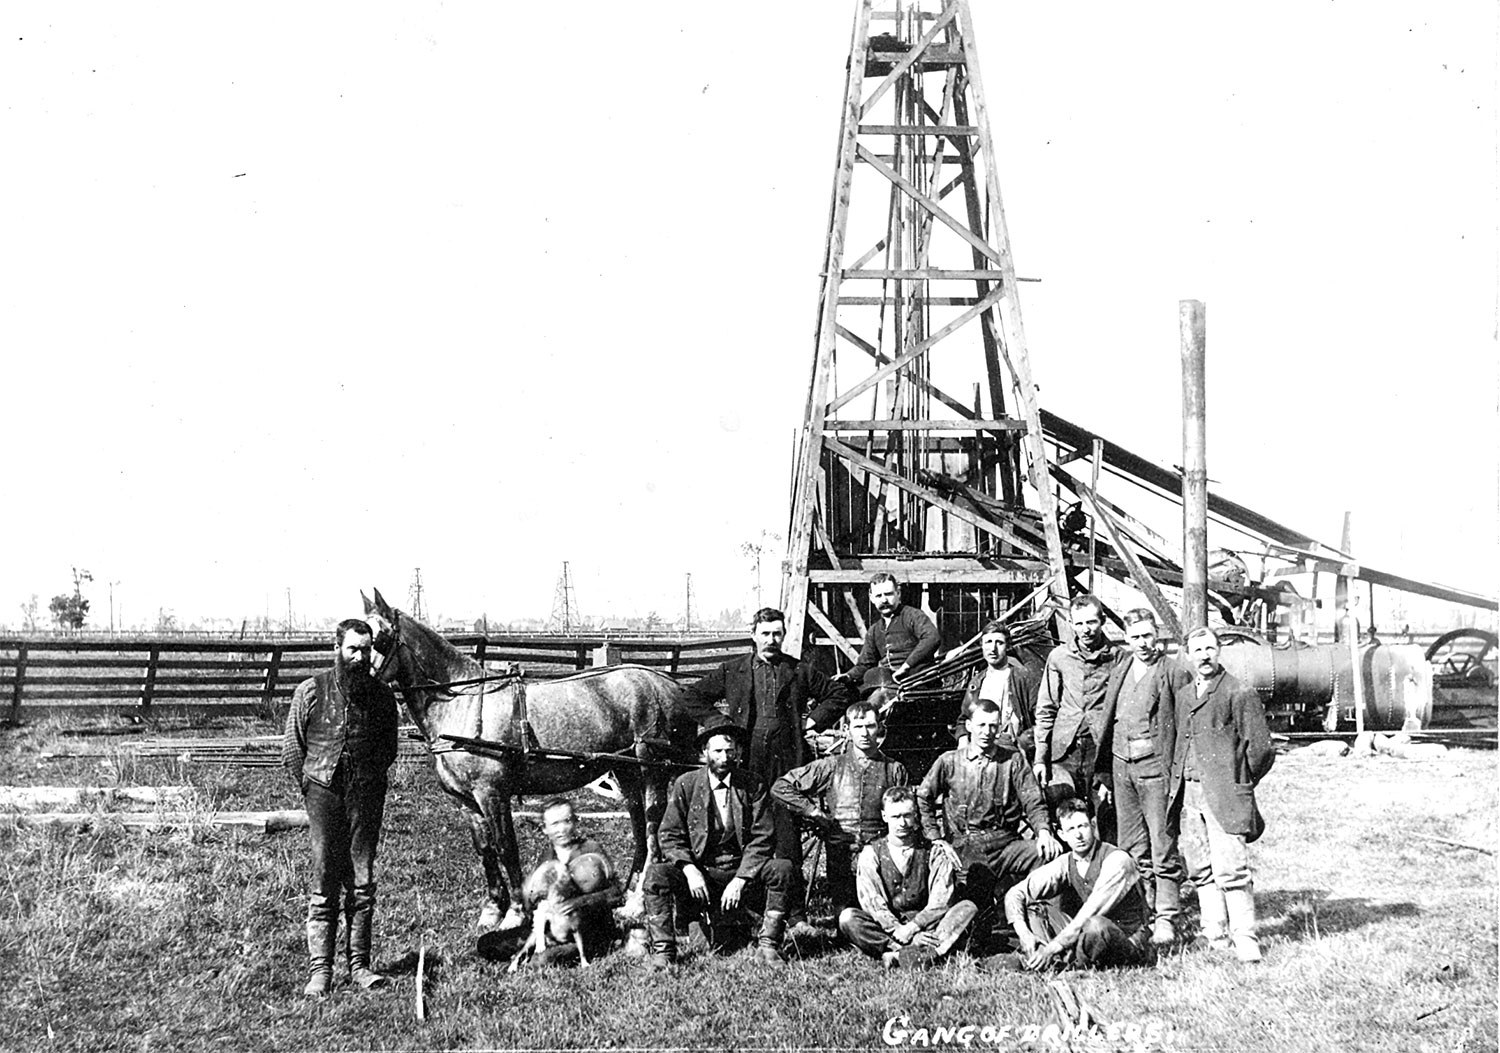 A drill crew at Petrolia in 1910, standing before their steam-powered drilling rig